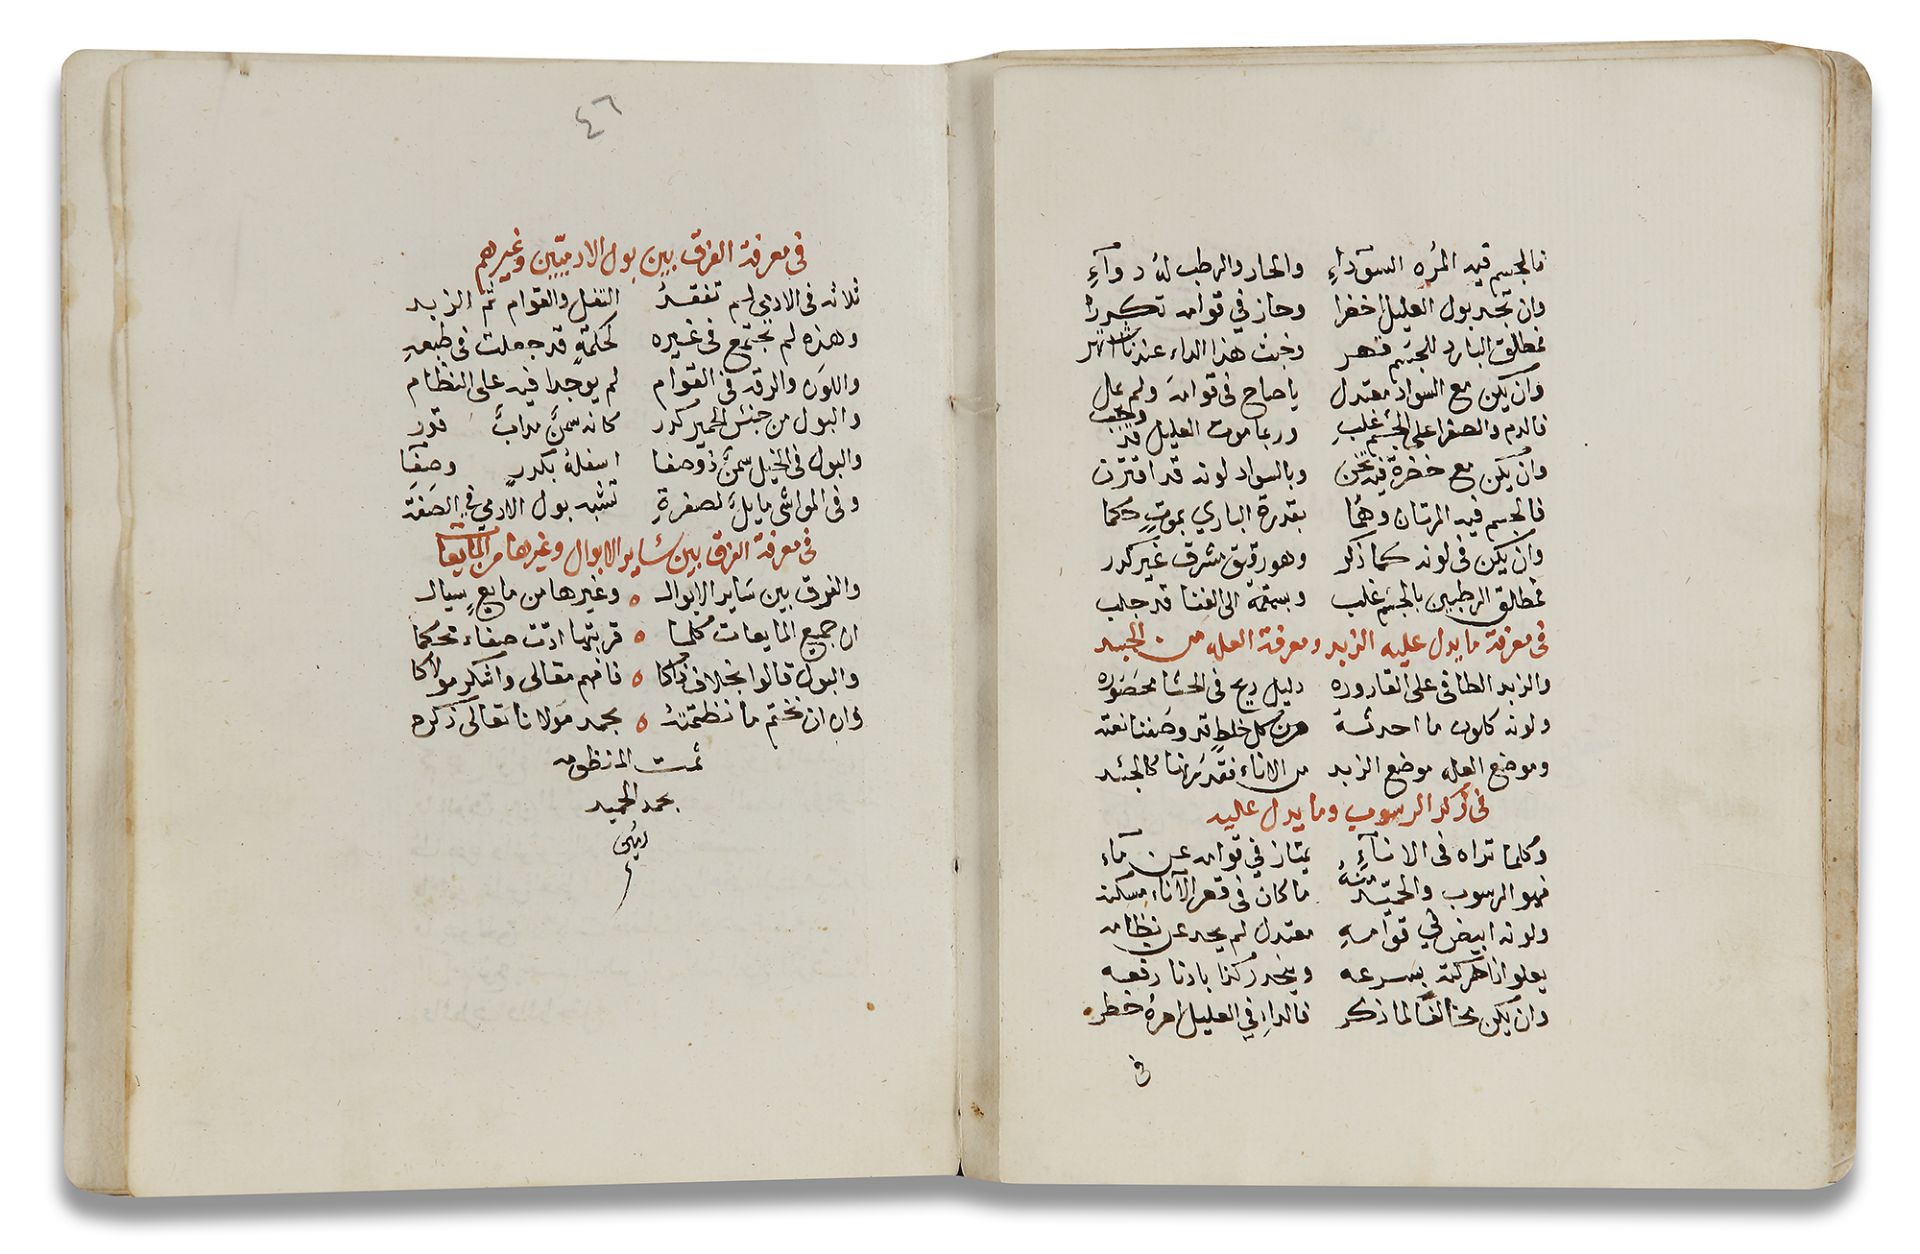 A MANUSCRIPT OF MEDICINE THAT CONTAINS SEVERAL IMPORTANT ARTICLES ABOUT TREATMENT AND MEDICINE,18TH